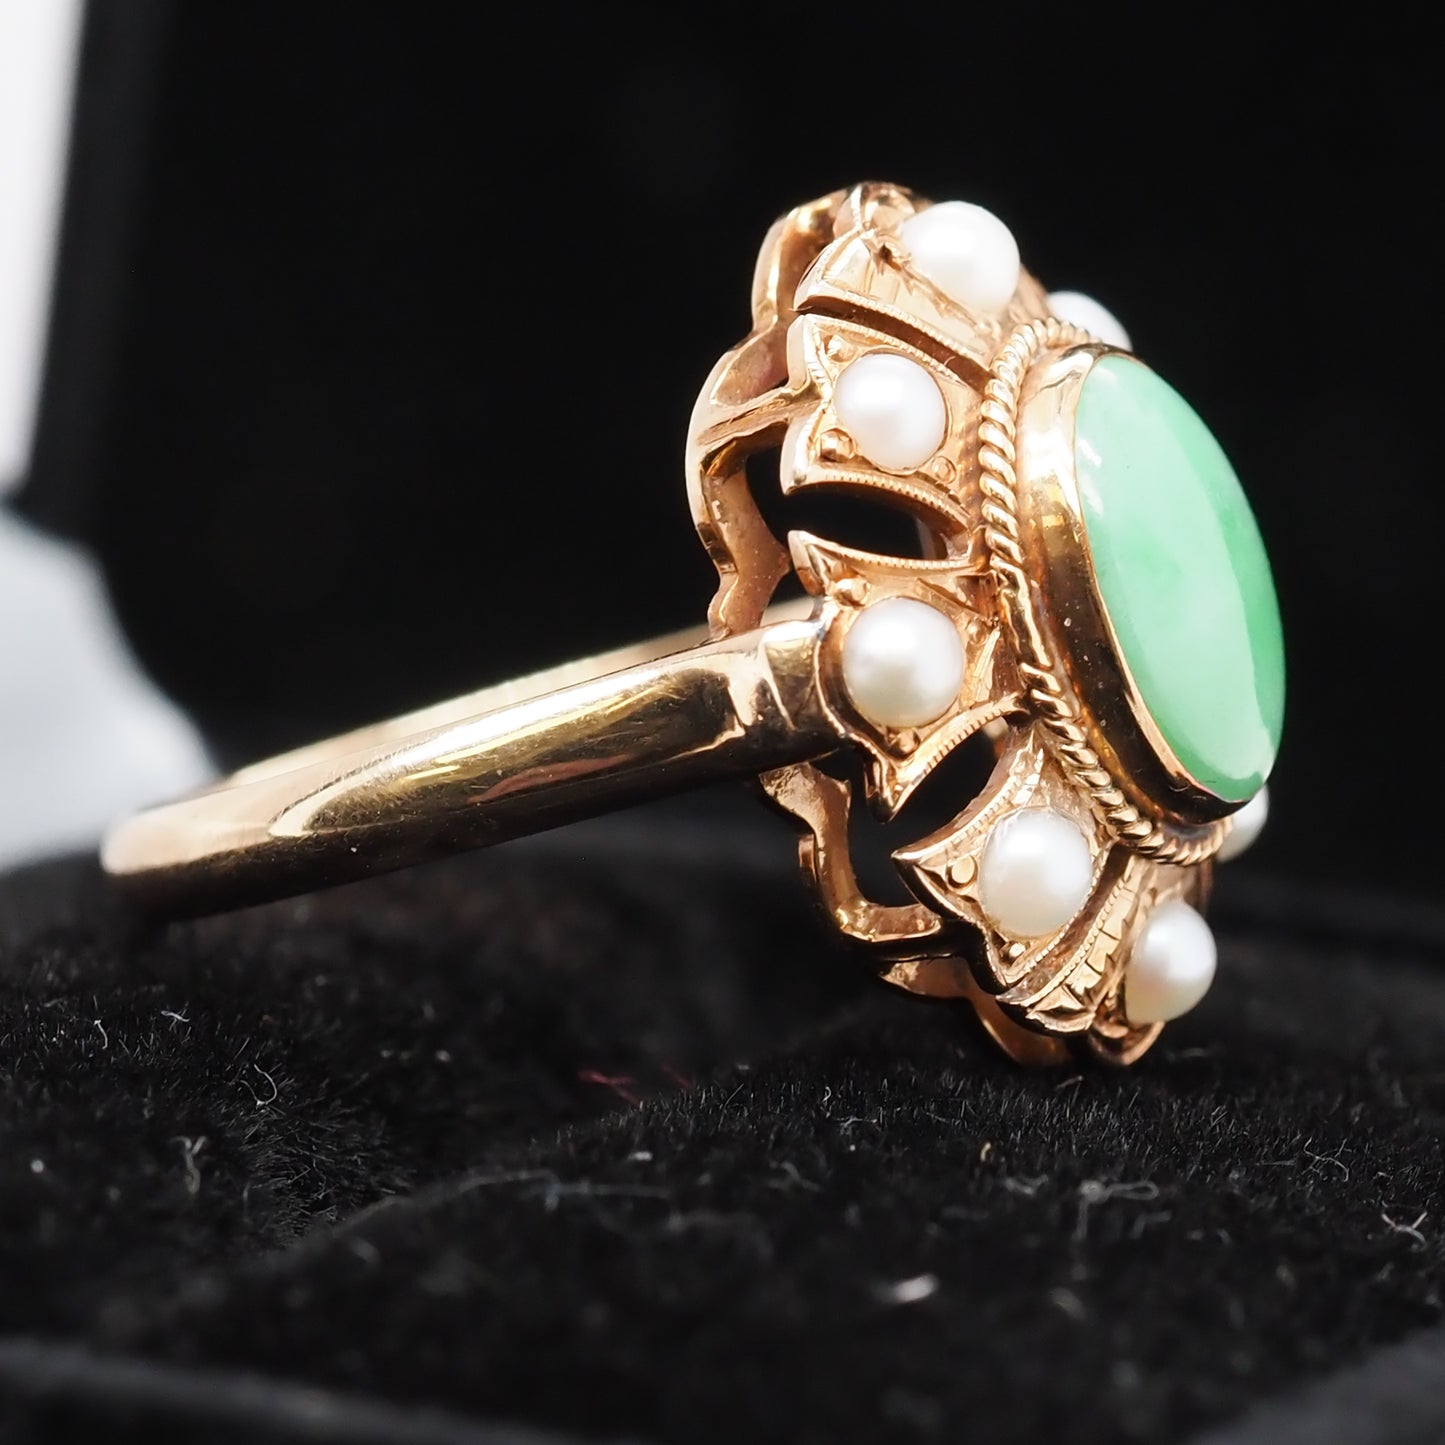 Vintage 1960s 14K Yellow Gold Jade and Pearl Cocktail Ring